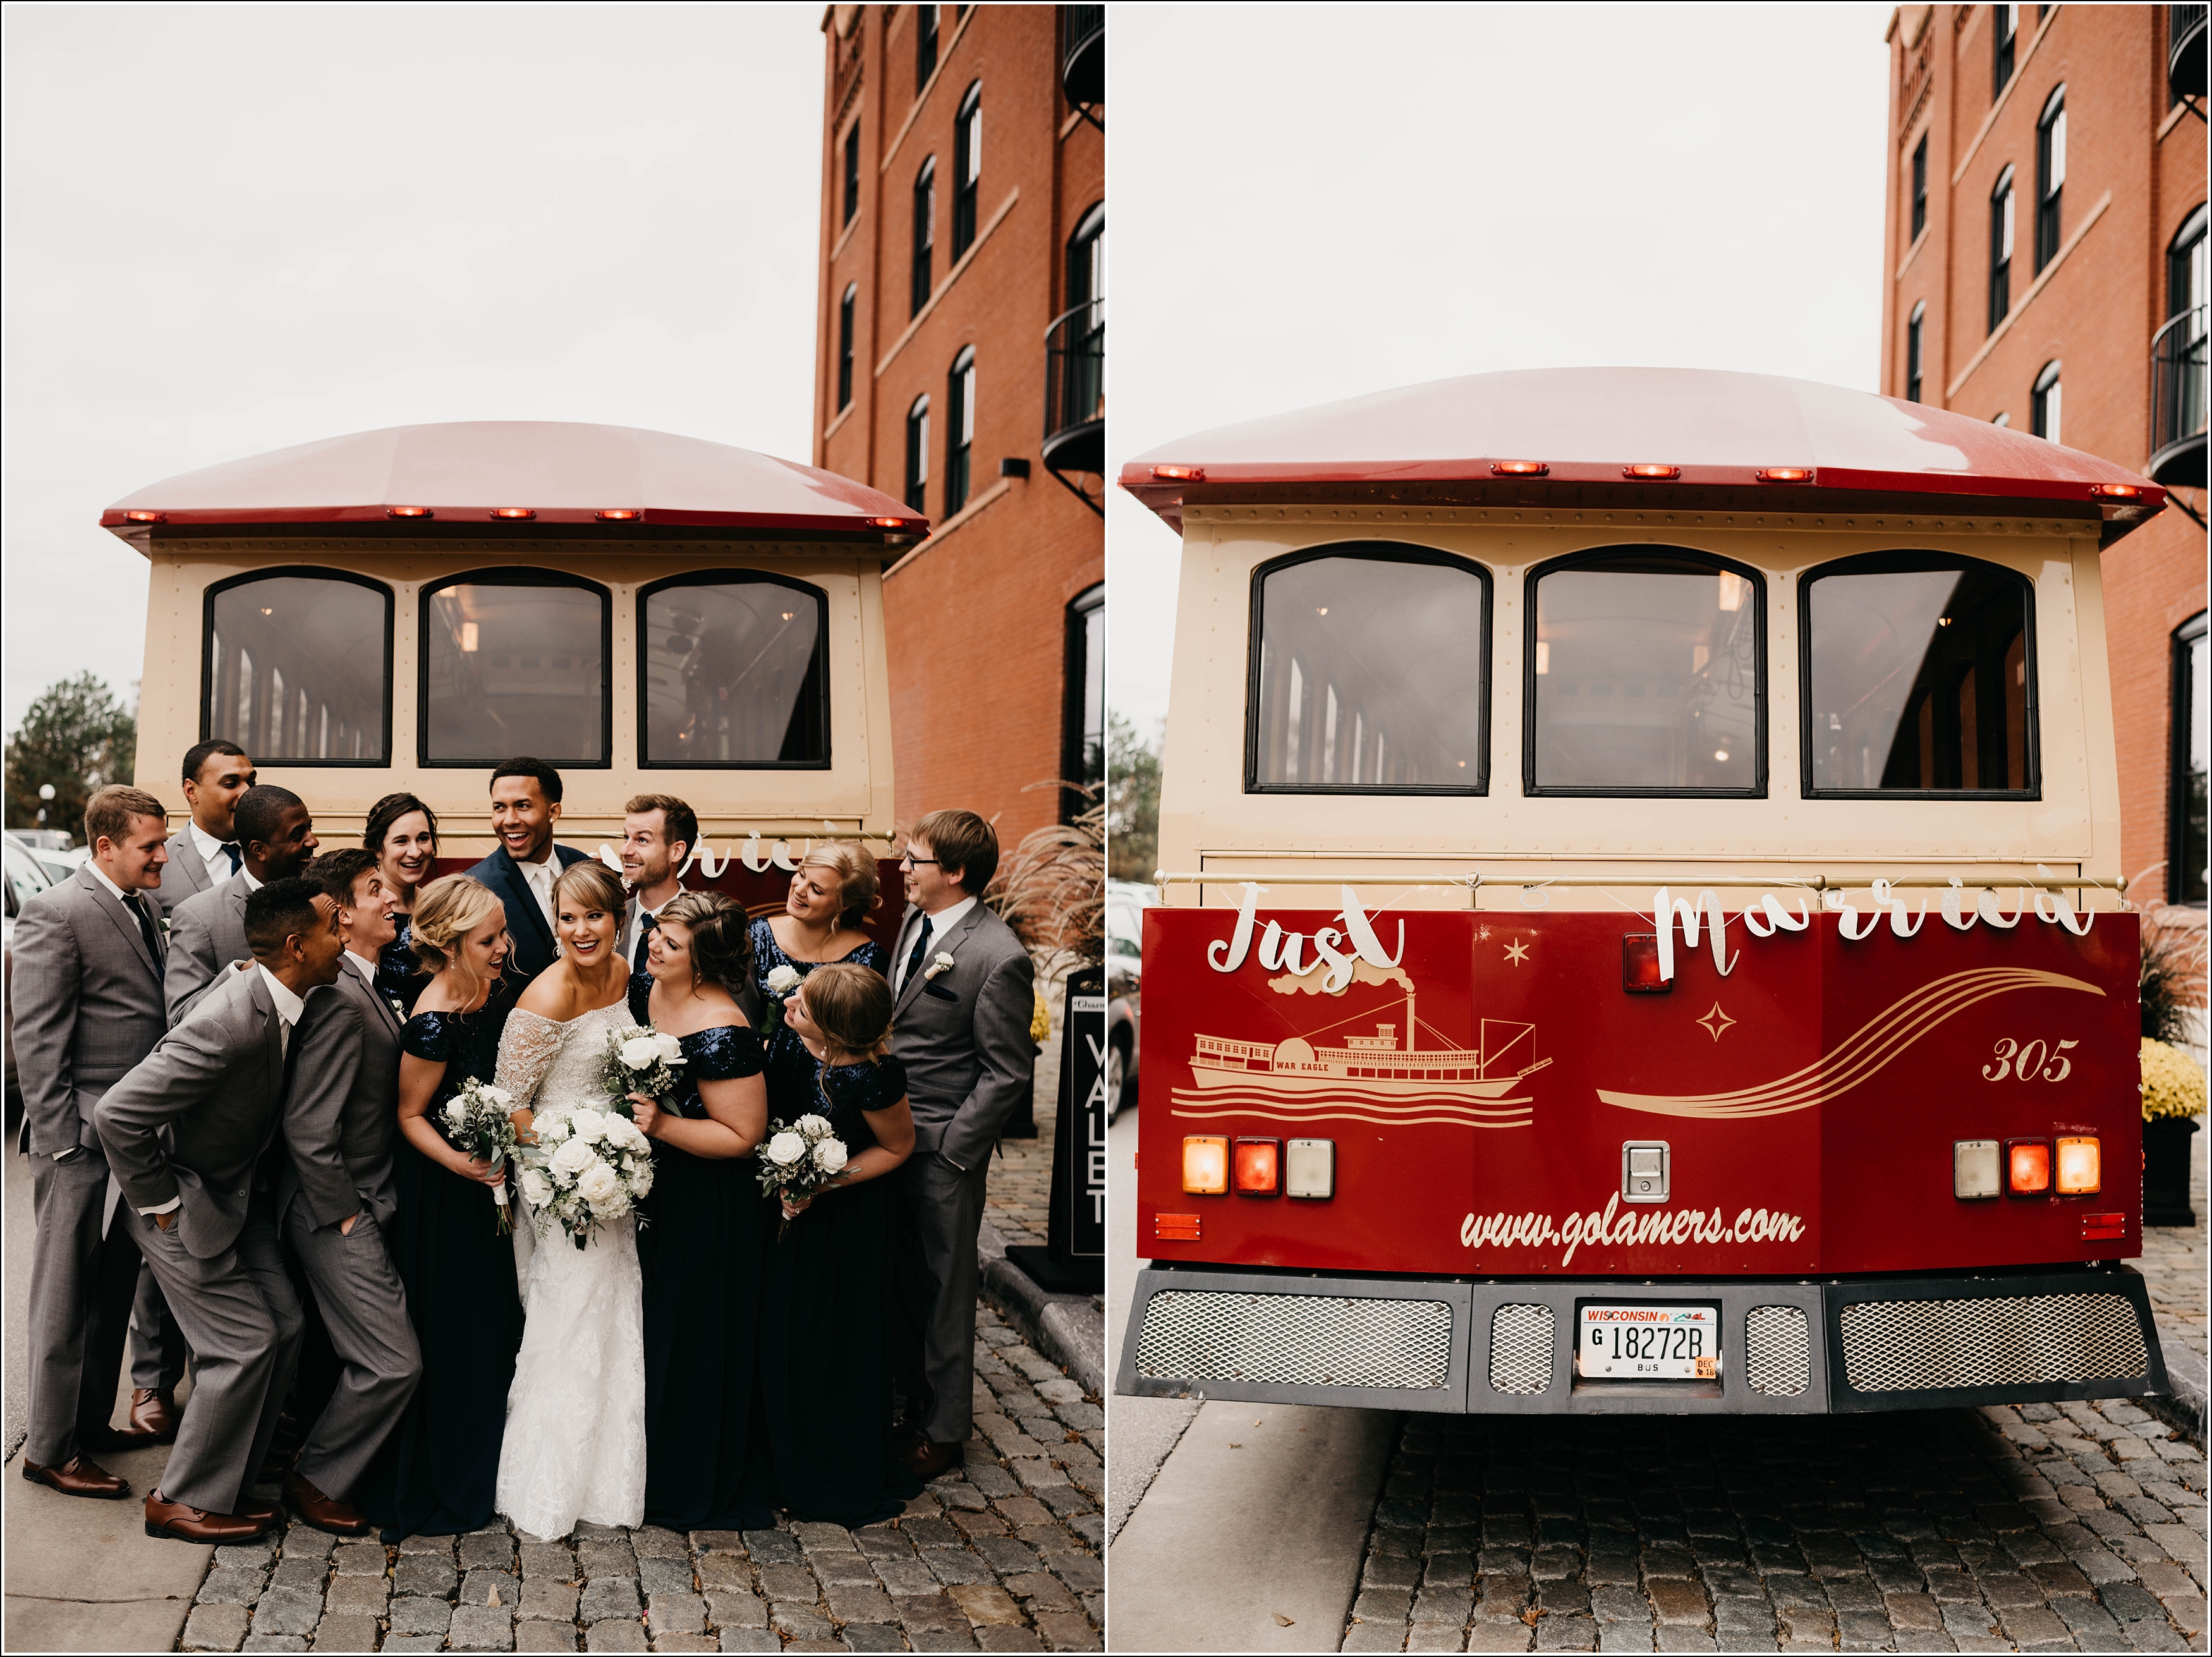 Lamers Trolley The Charmont wedding party romantic fall wedding